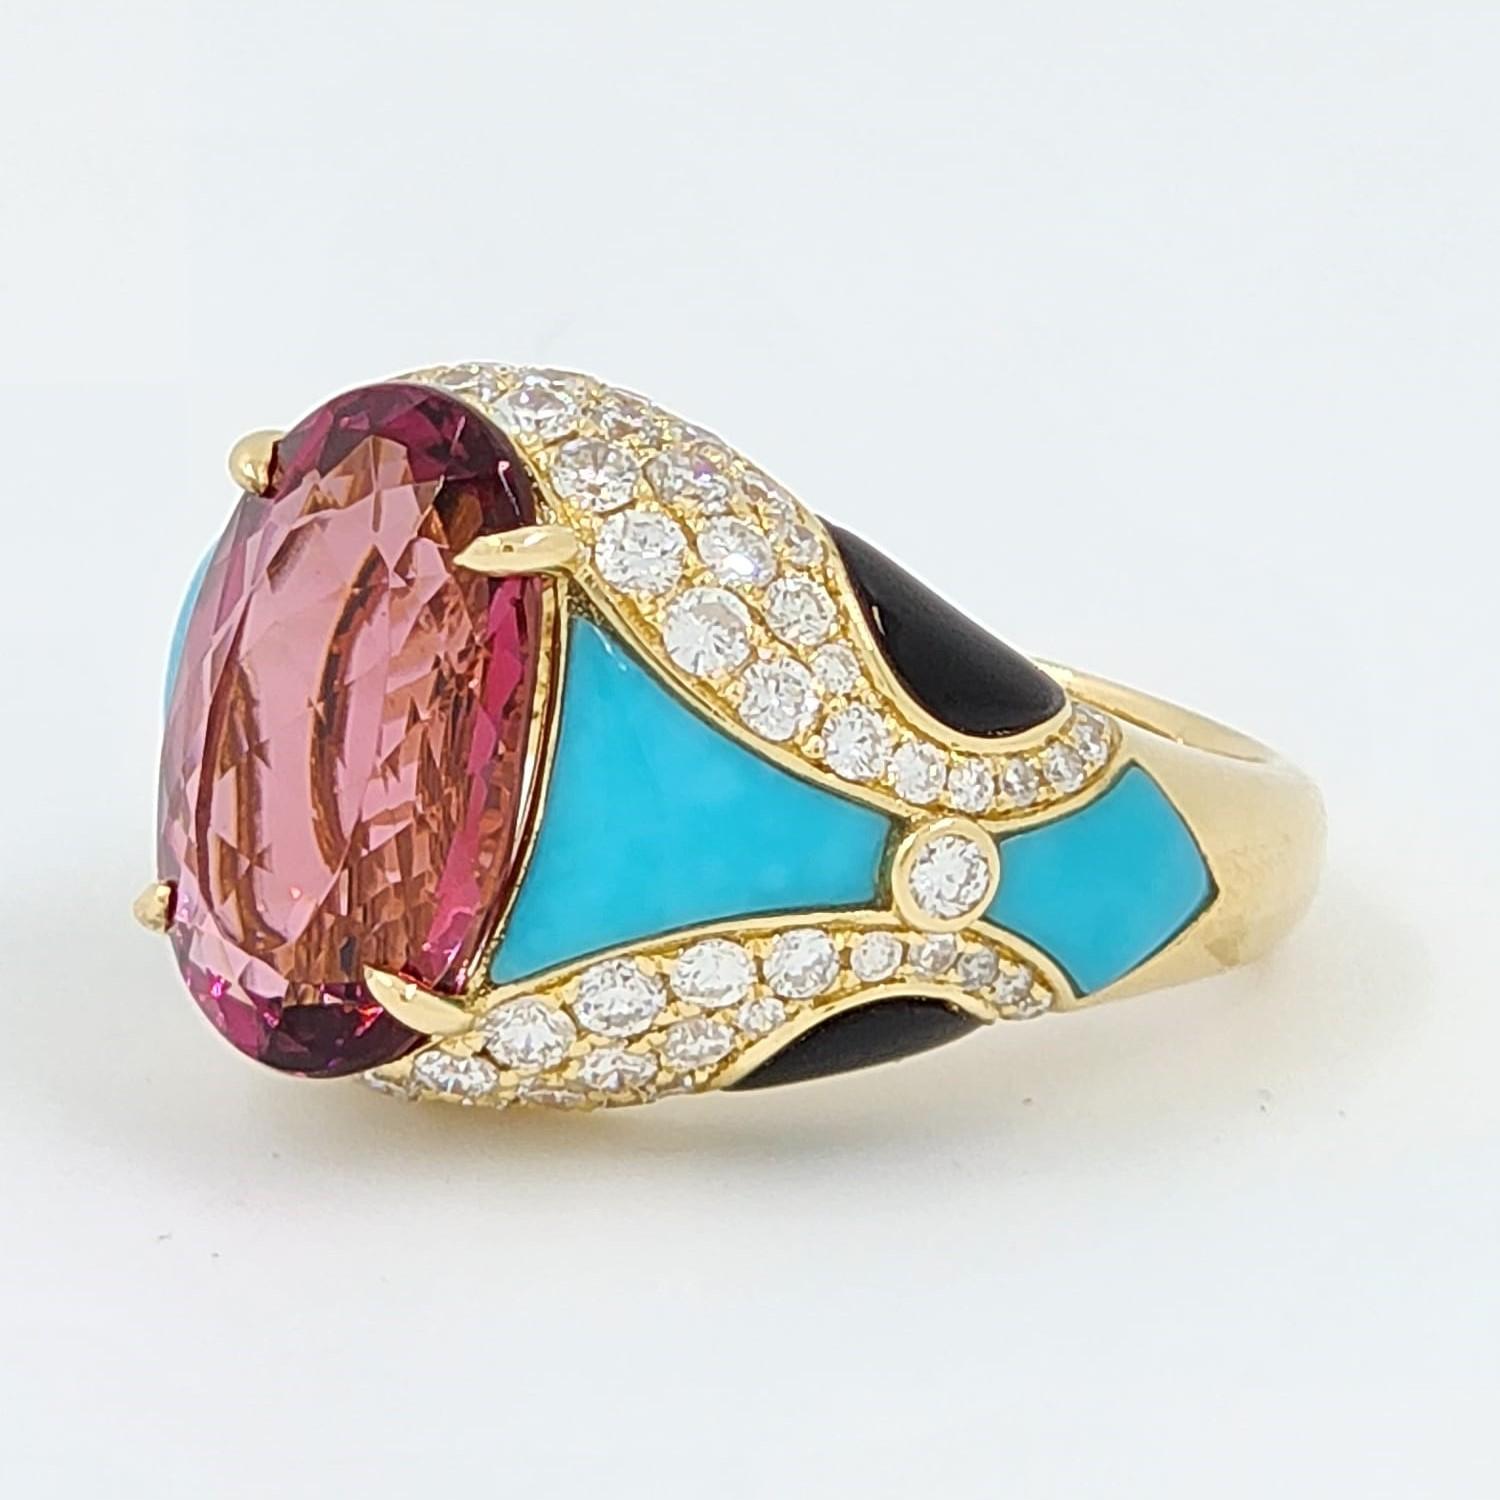 Oval Cut Art Deco Rubellite Turquoise Onyx Diamond Cocktail Ring in 18 Karat Yellow Gold For Sale